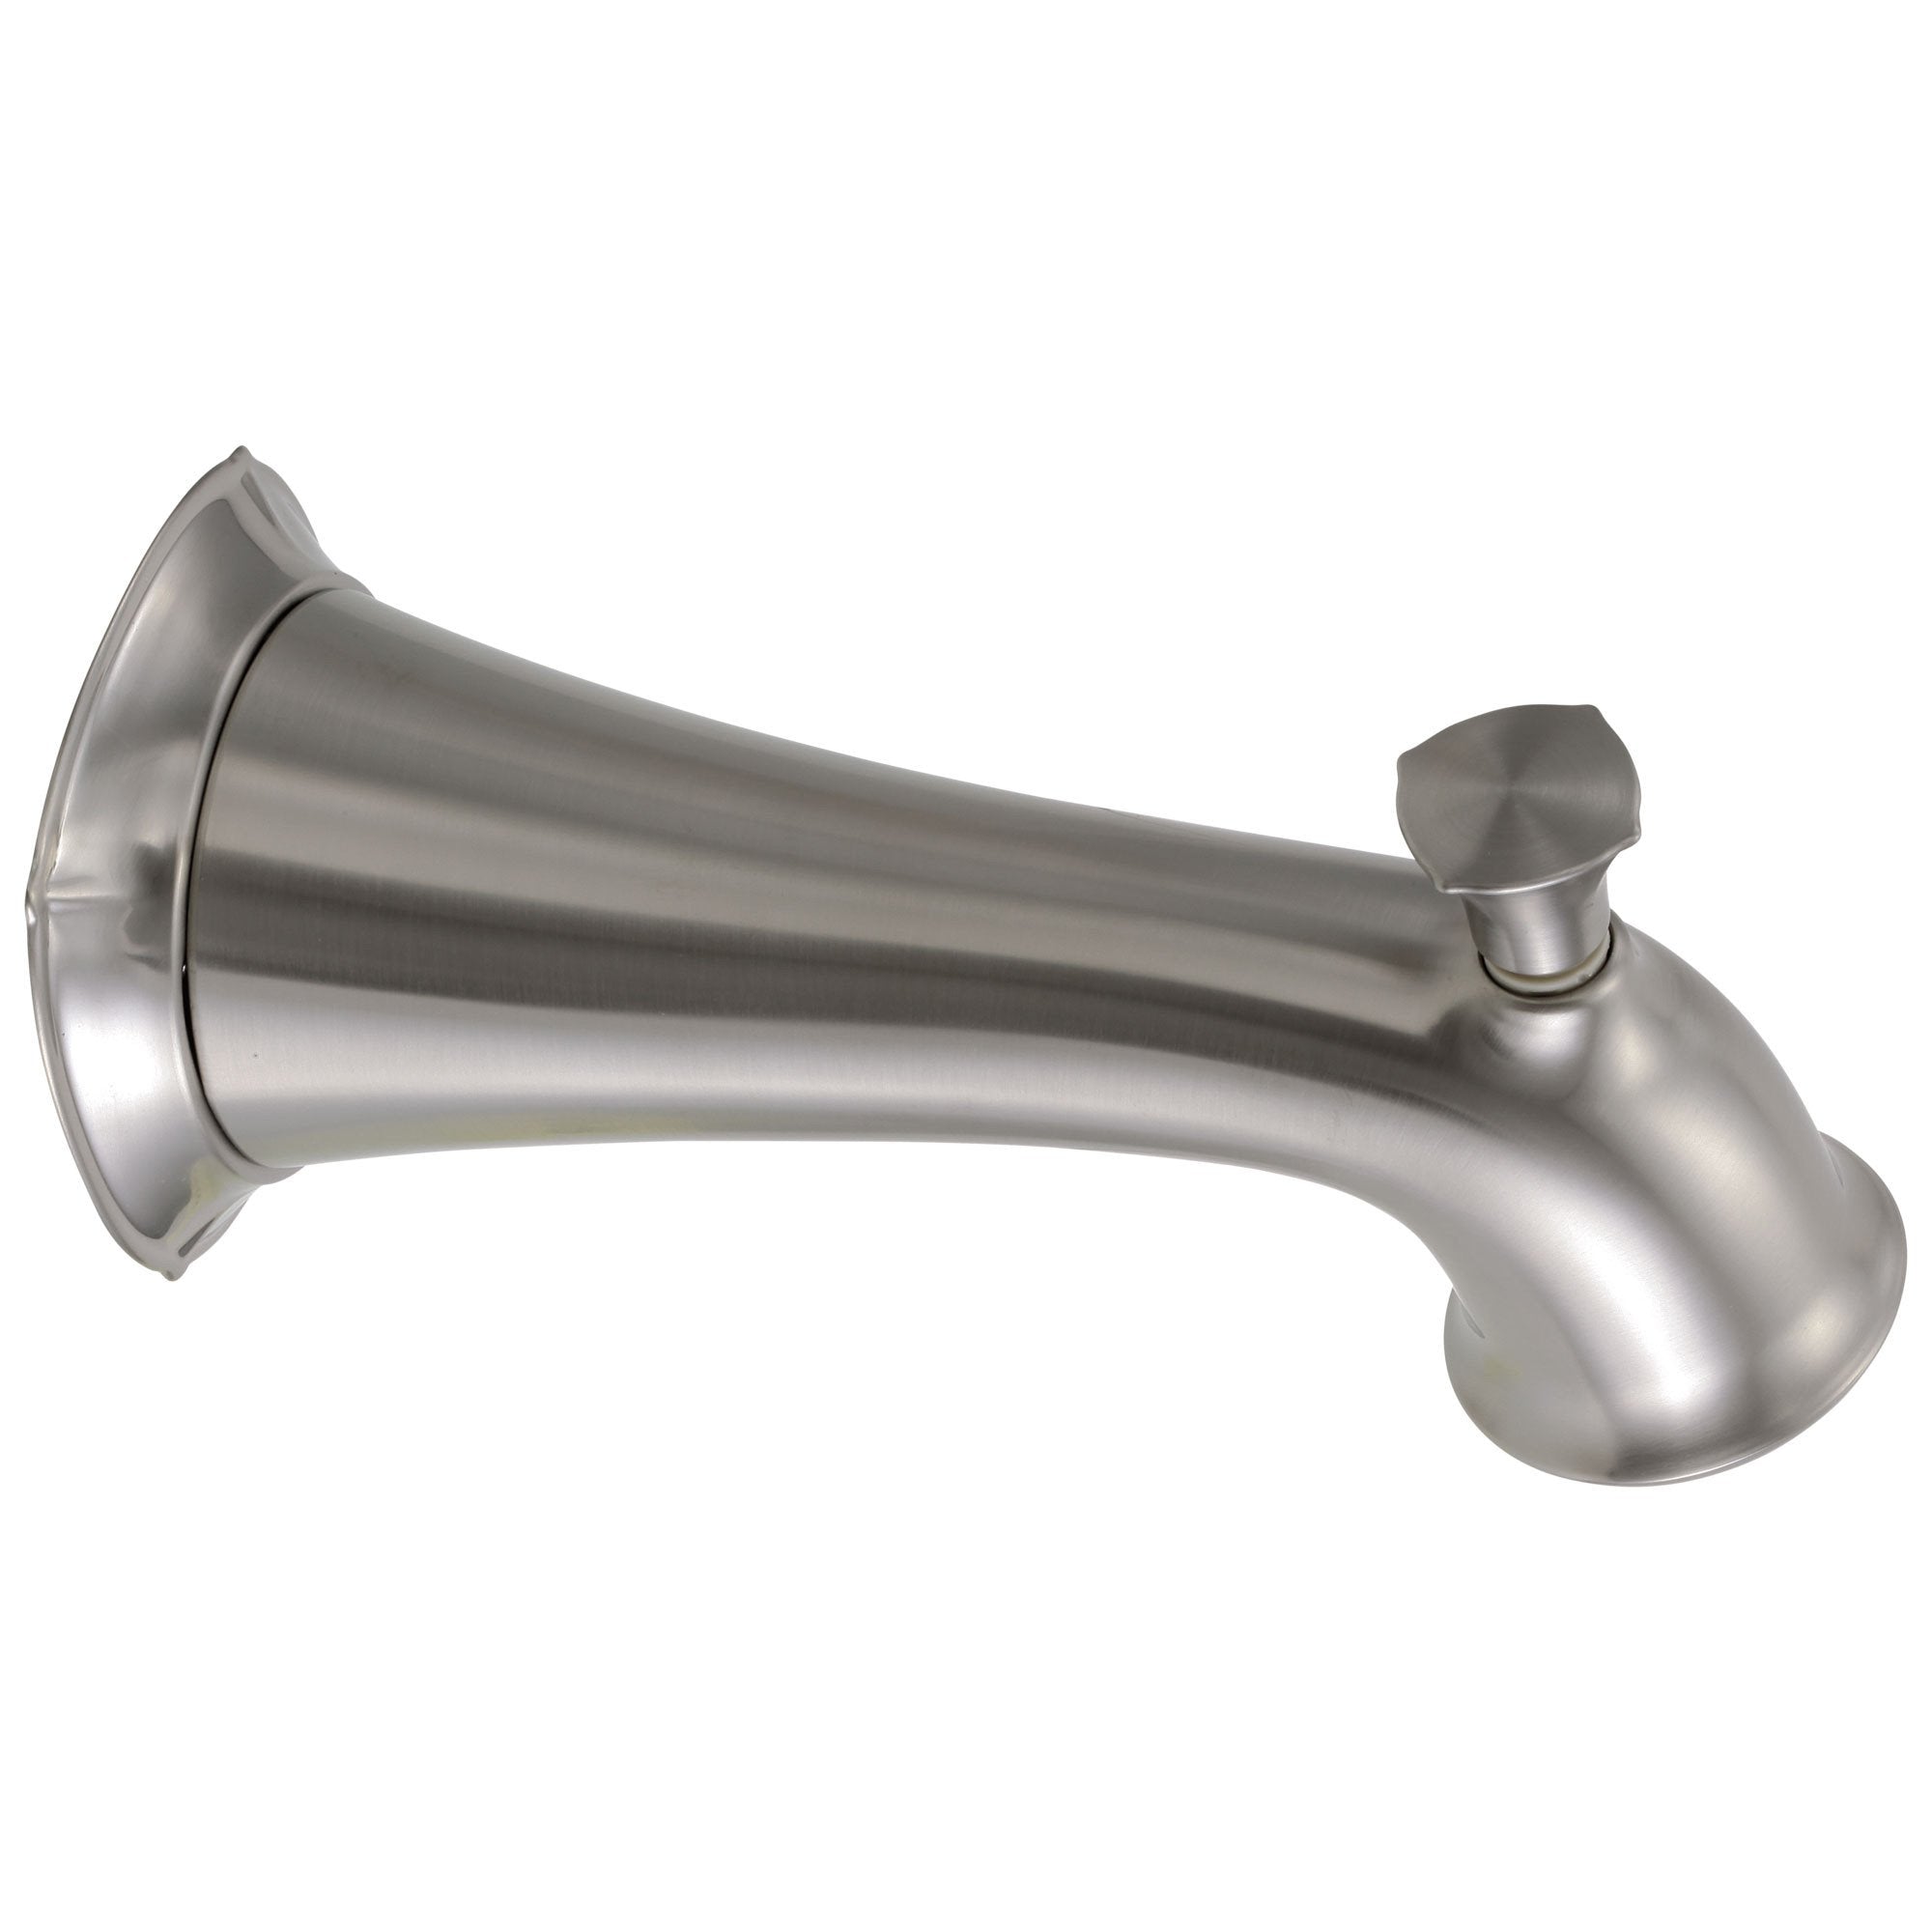 Delta Stainless Steel Finish Pull-Up Diverter Tub Spout DRP71018SS